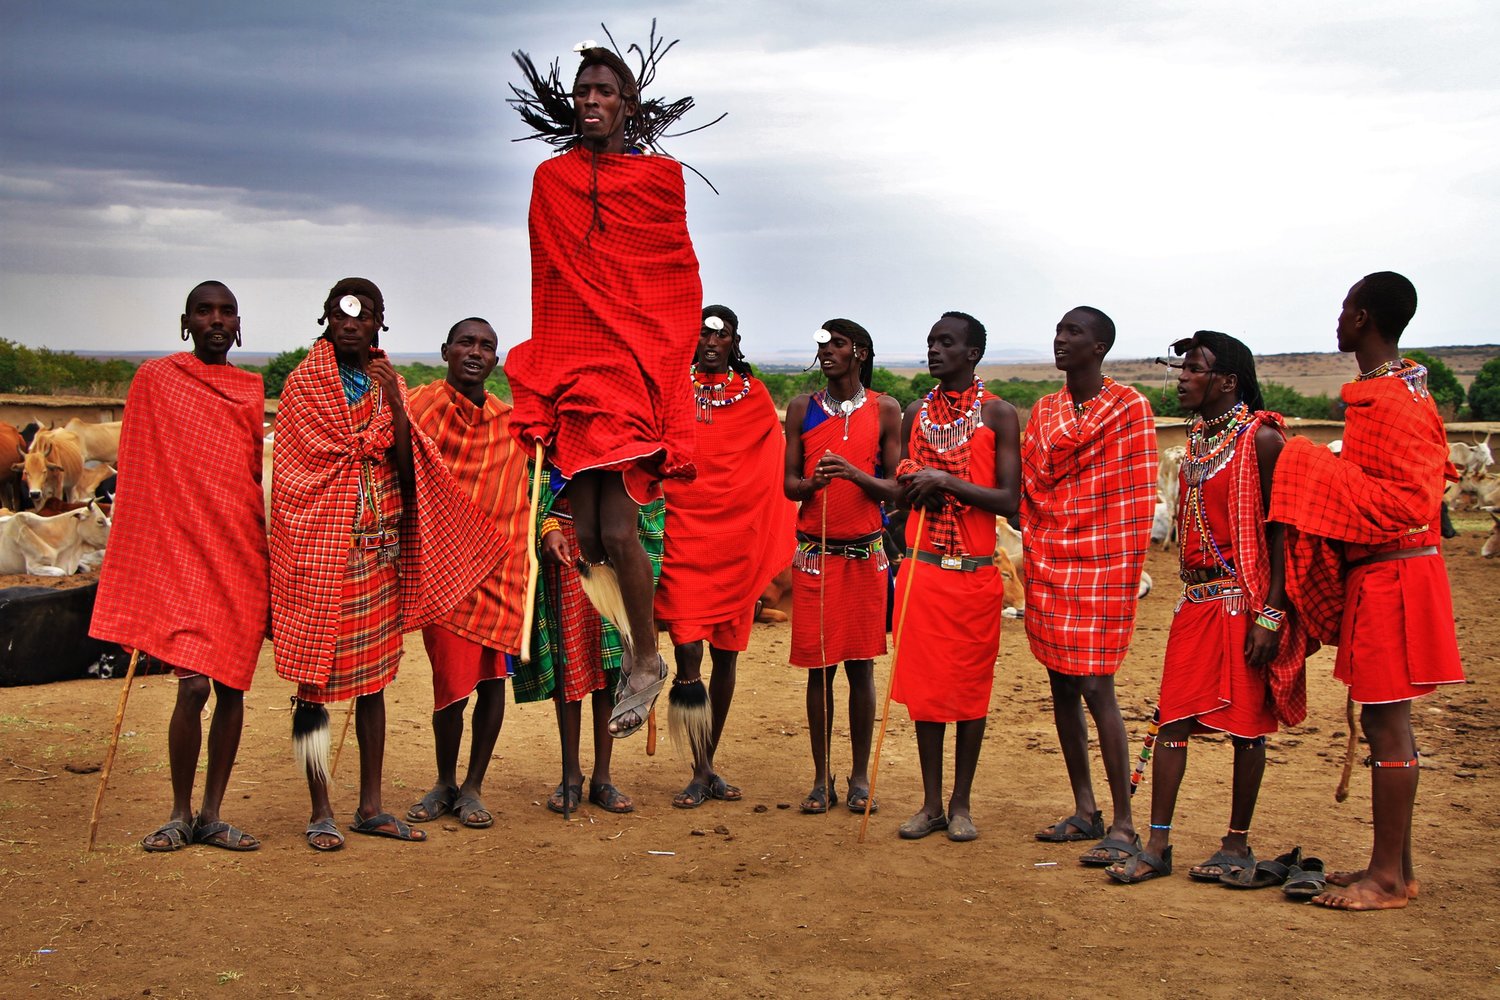 MAASAI style for Vlisco // PRINT TASTIC that. – APPETITE FOR